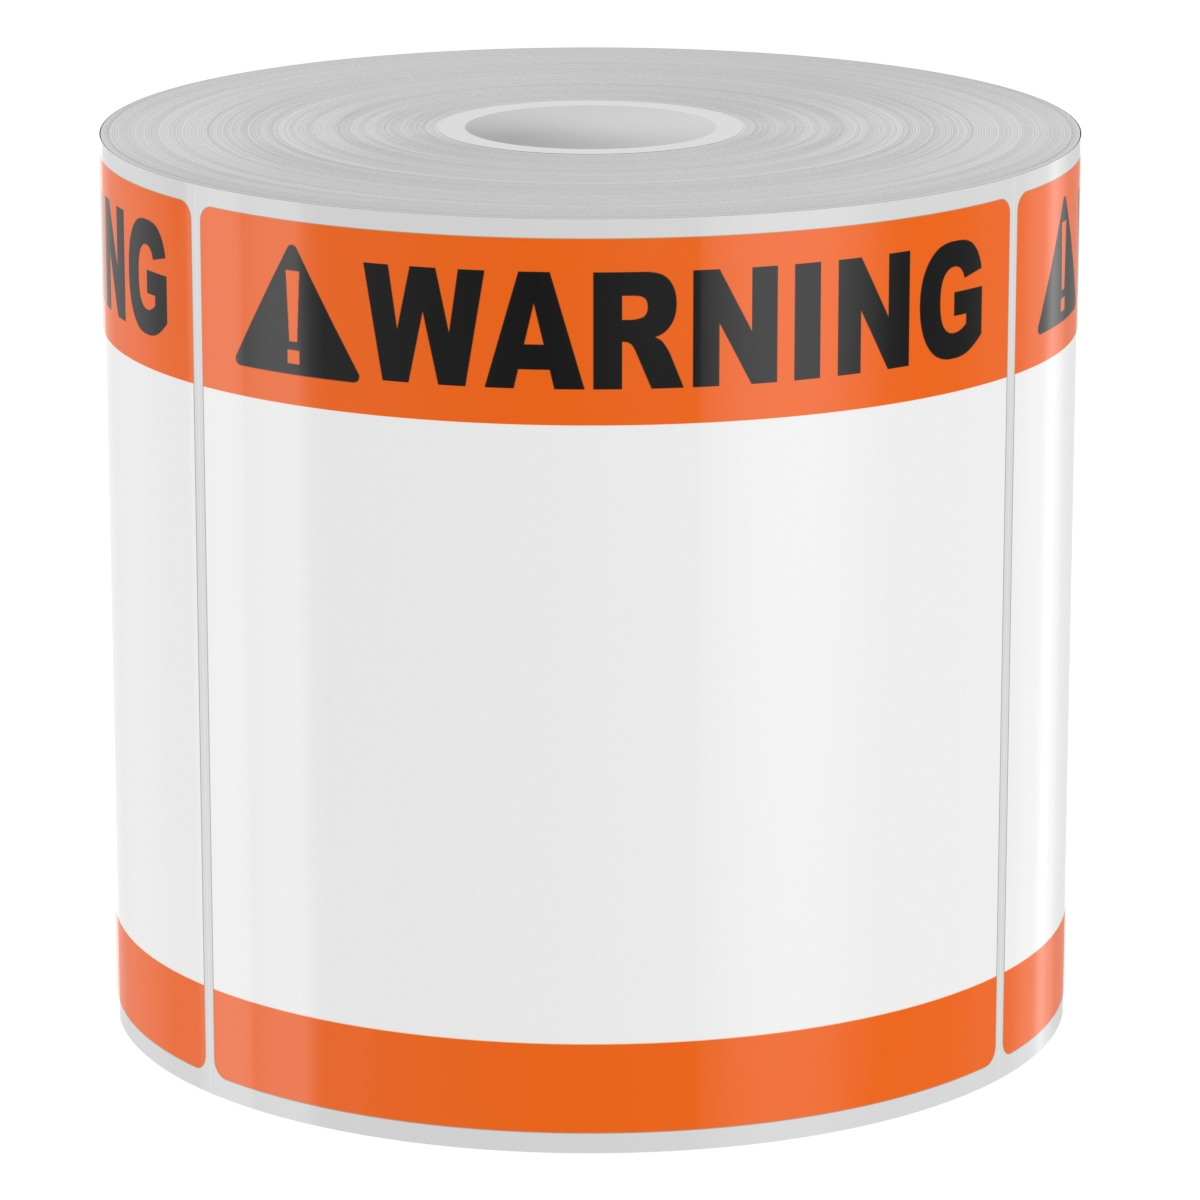 Detail view for 250 4" x 4" High-Performance Orange Double Band with Black Warning